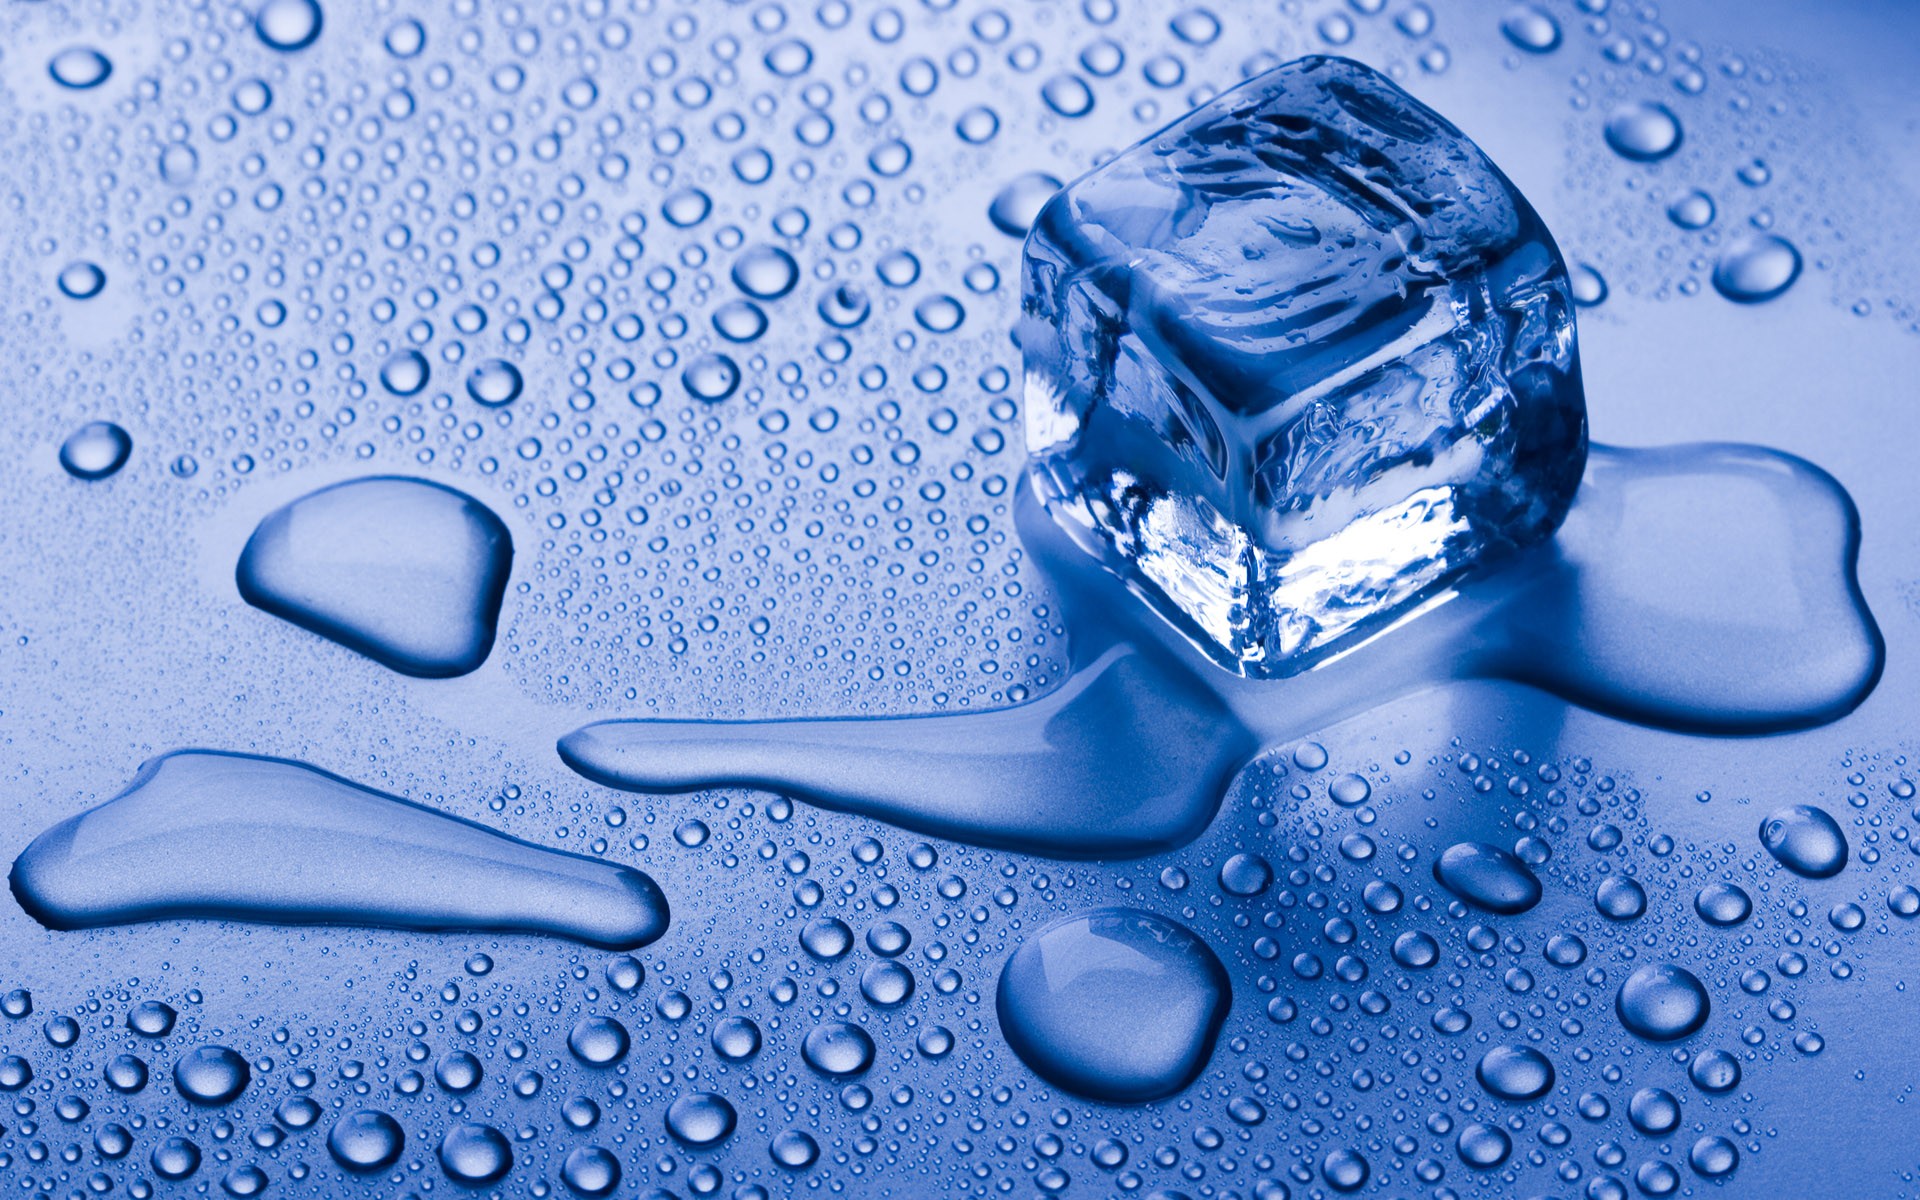 Melting Ice Cubes Wallpaper Images amp Pictures Becuo